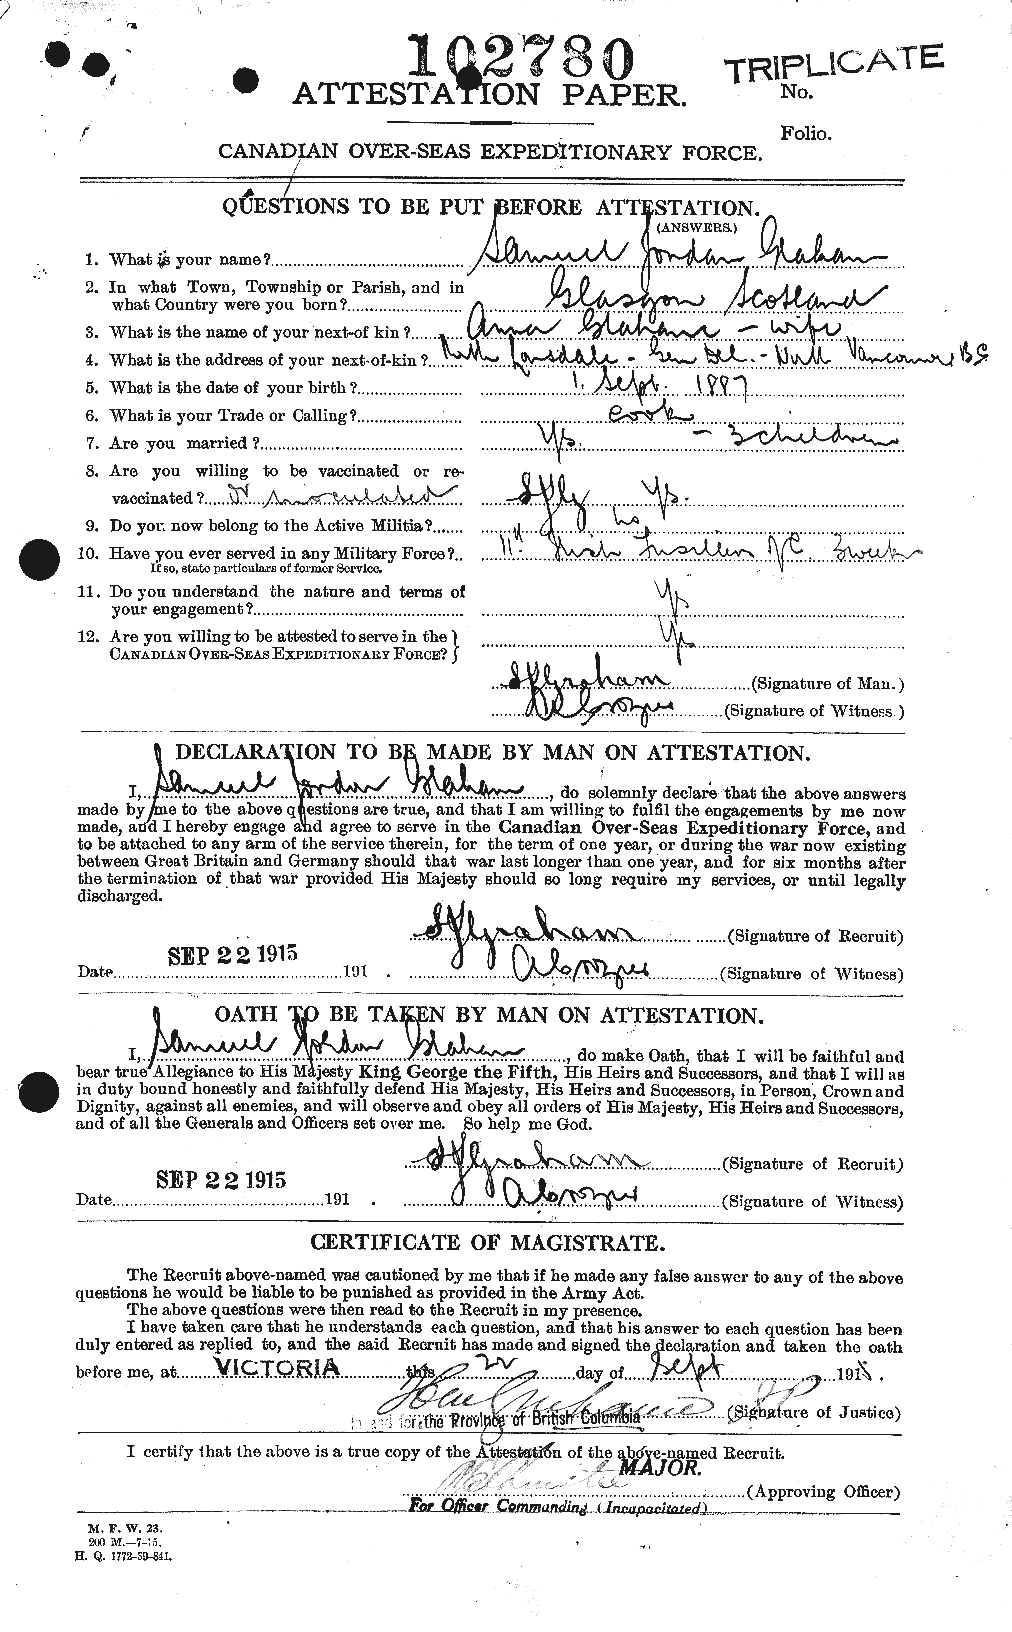 Personnel Records of the First World War - CEF 359458a